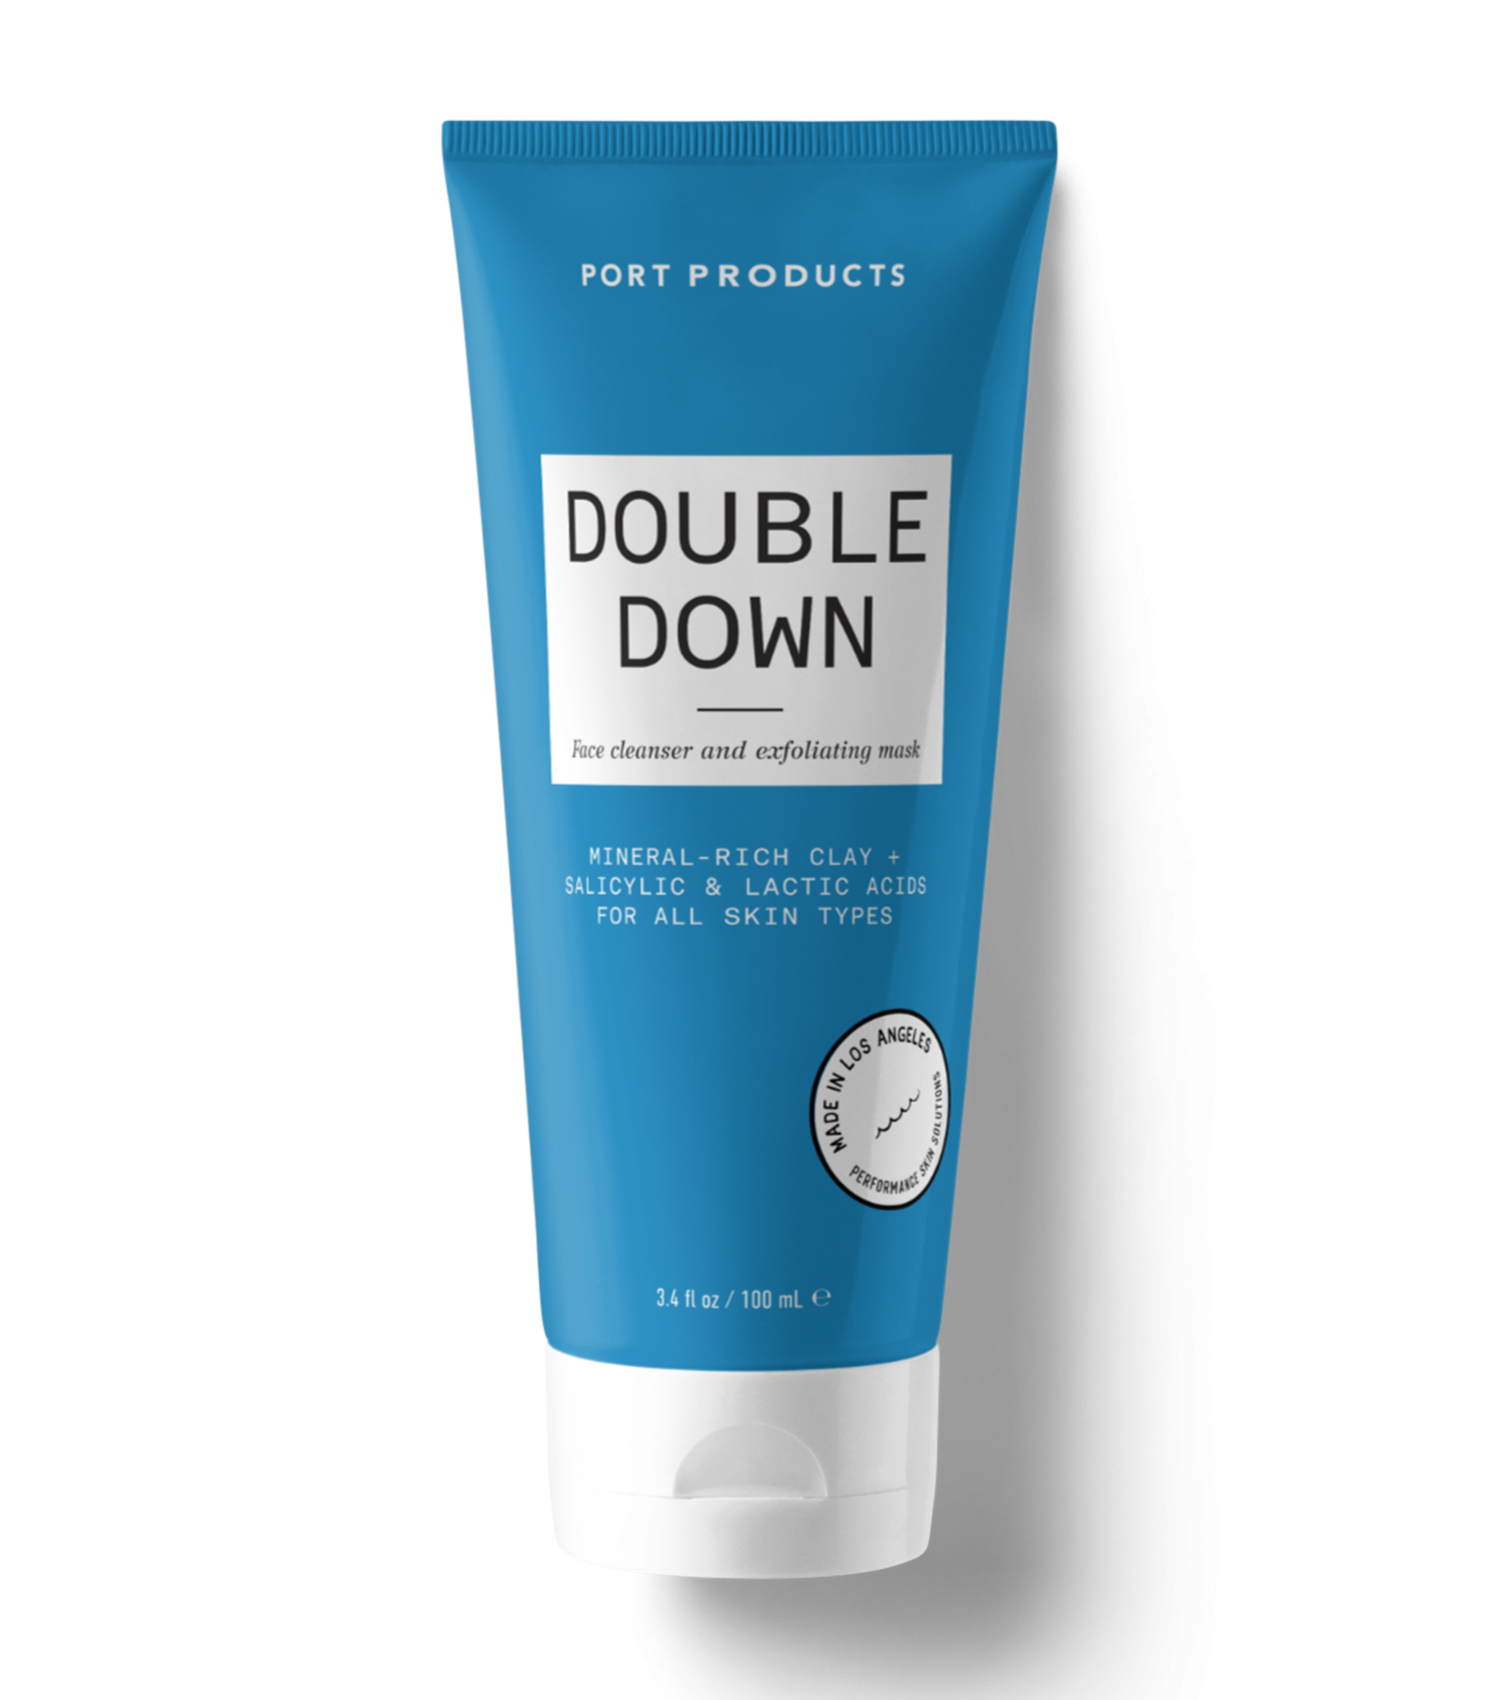 Port Products Double Down Facial Cleanser and Exfoliating Mask  1